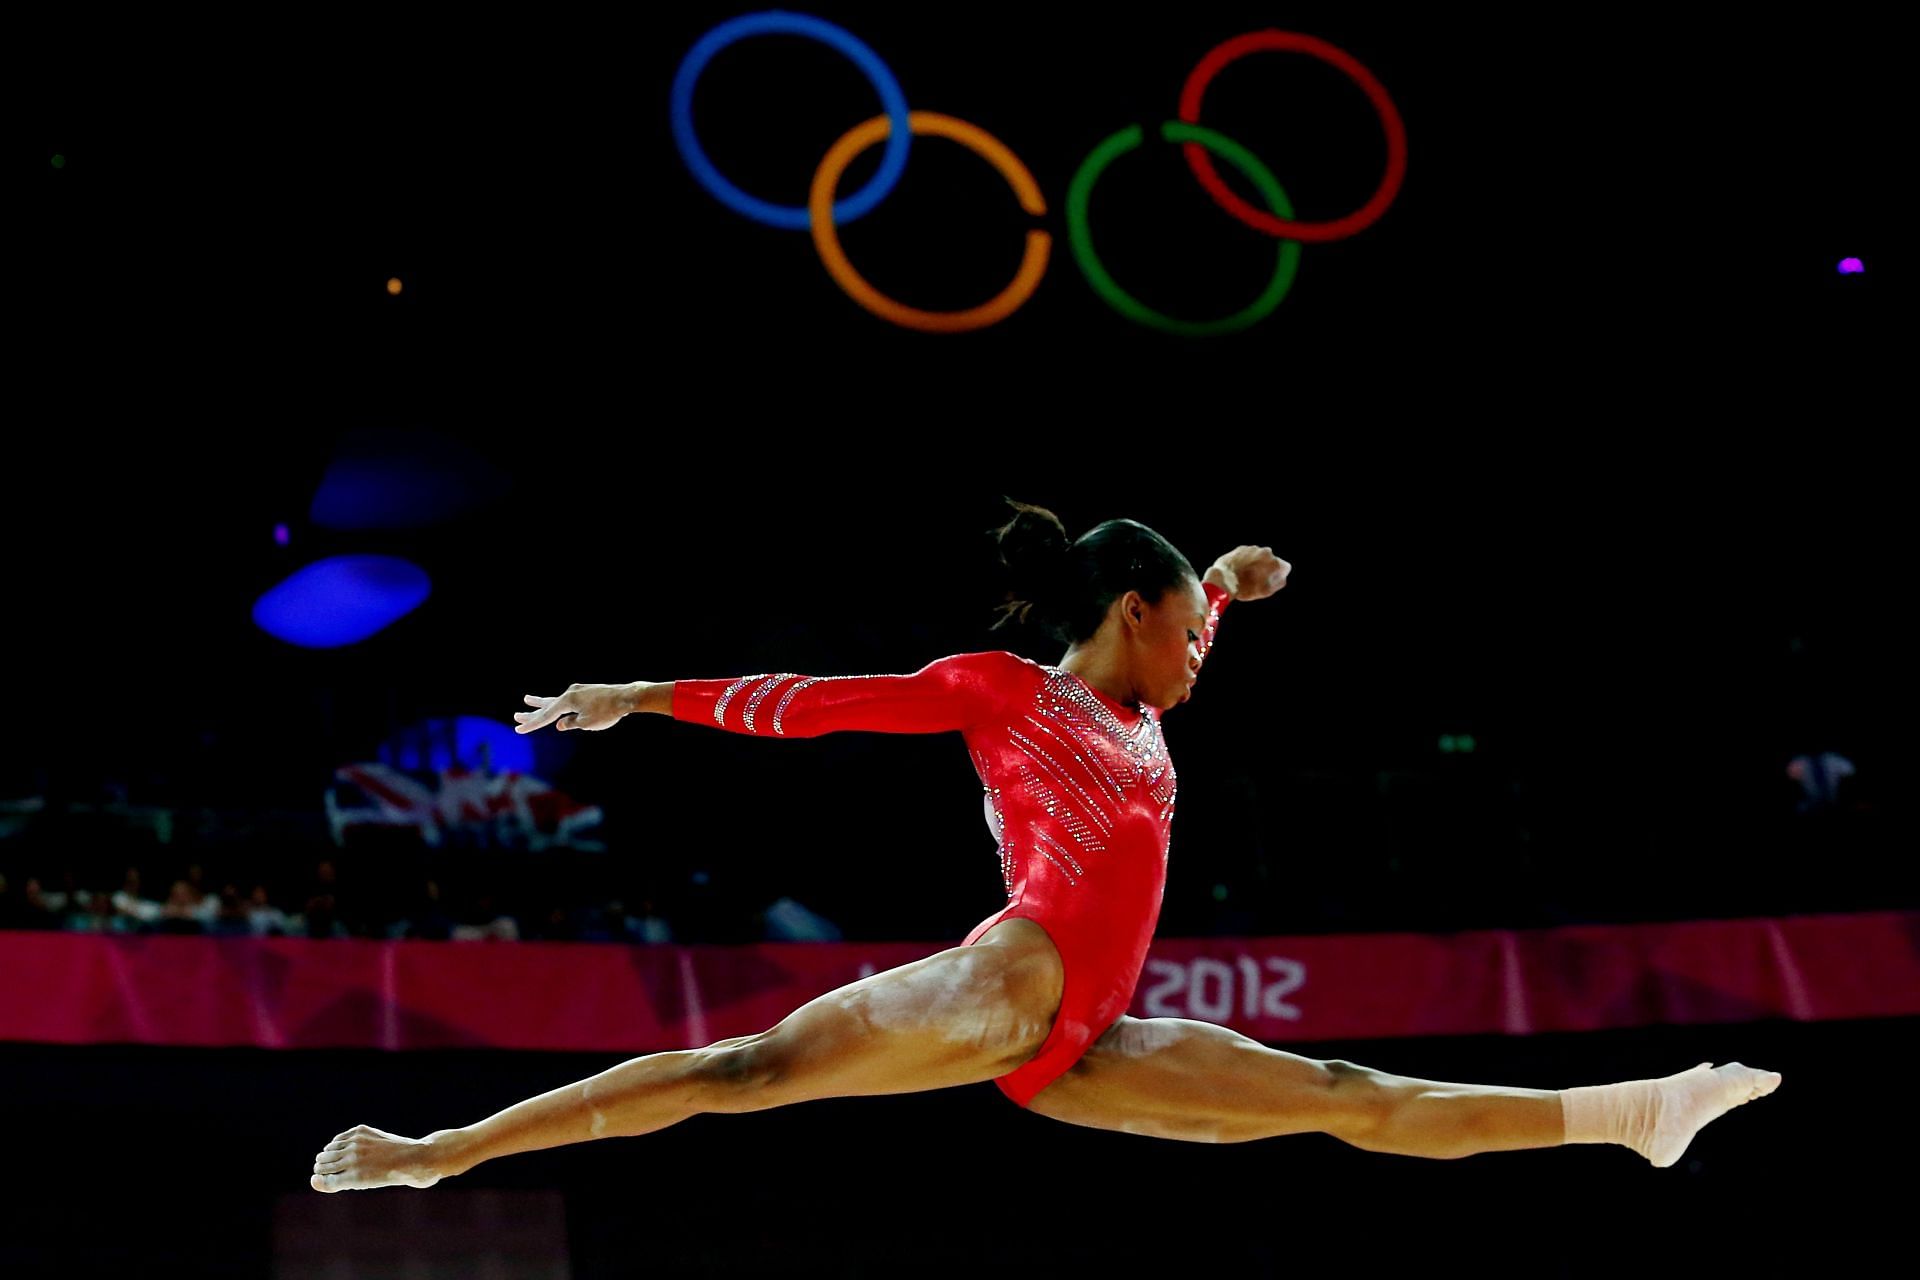 Gabrielle Douglas competes on the balance beam in the Artistic Gymnastics Women&#039;s Team final at the 2012 Olympic Games in London, England.